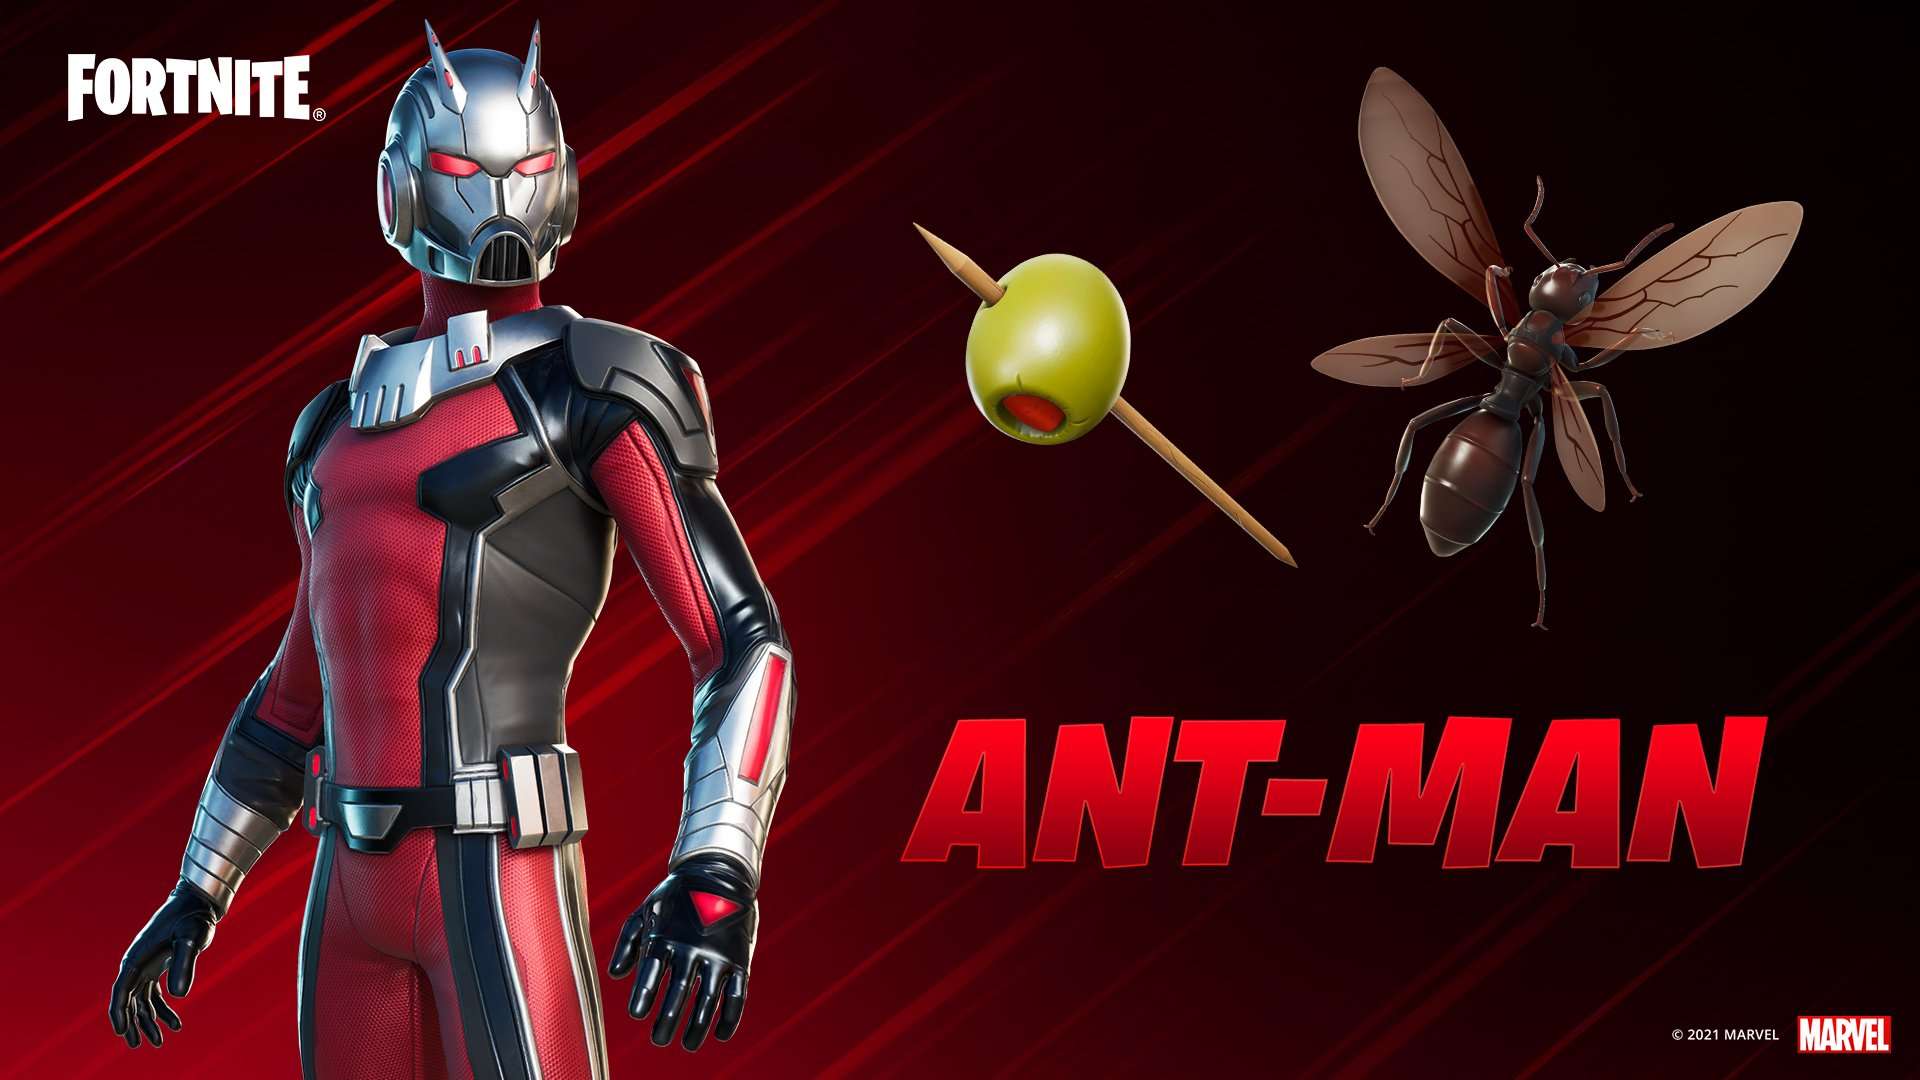 A picture of Ant-Man